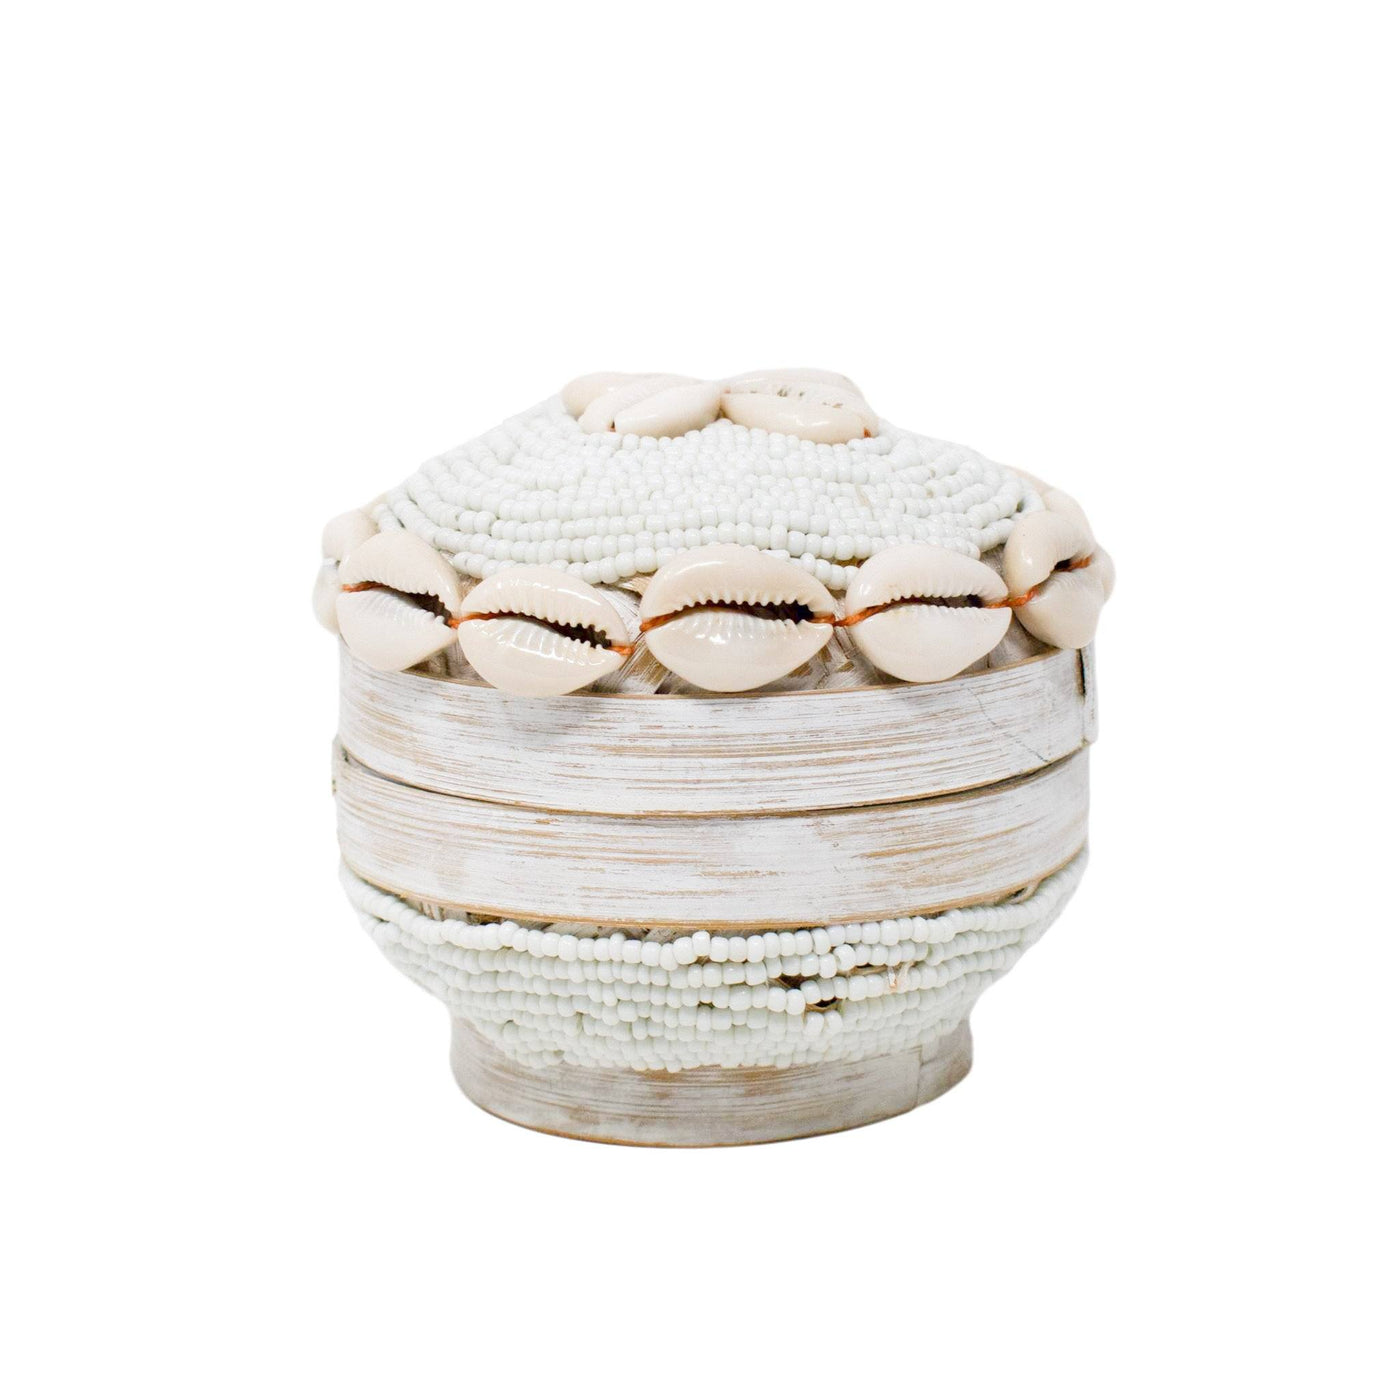 Gili Shell Bowl with Lid - White by POPPY + SAGE